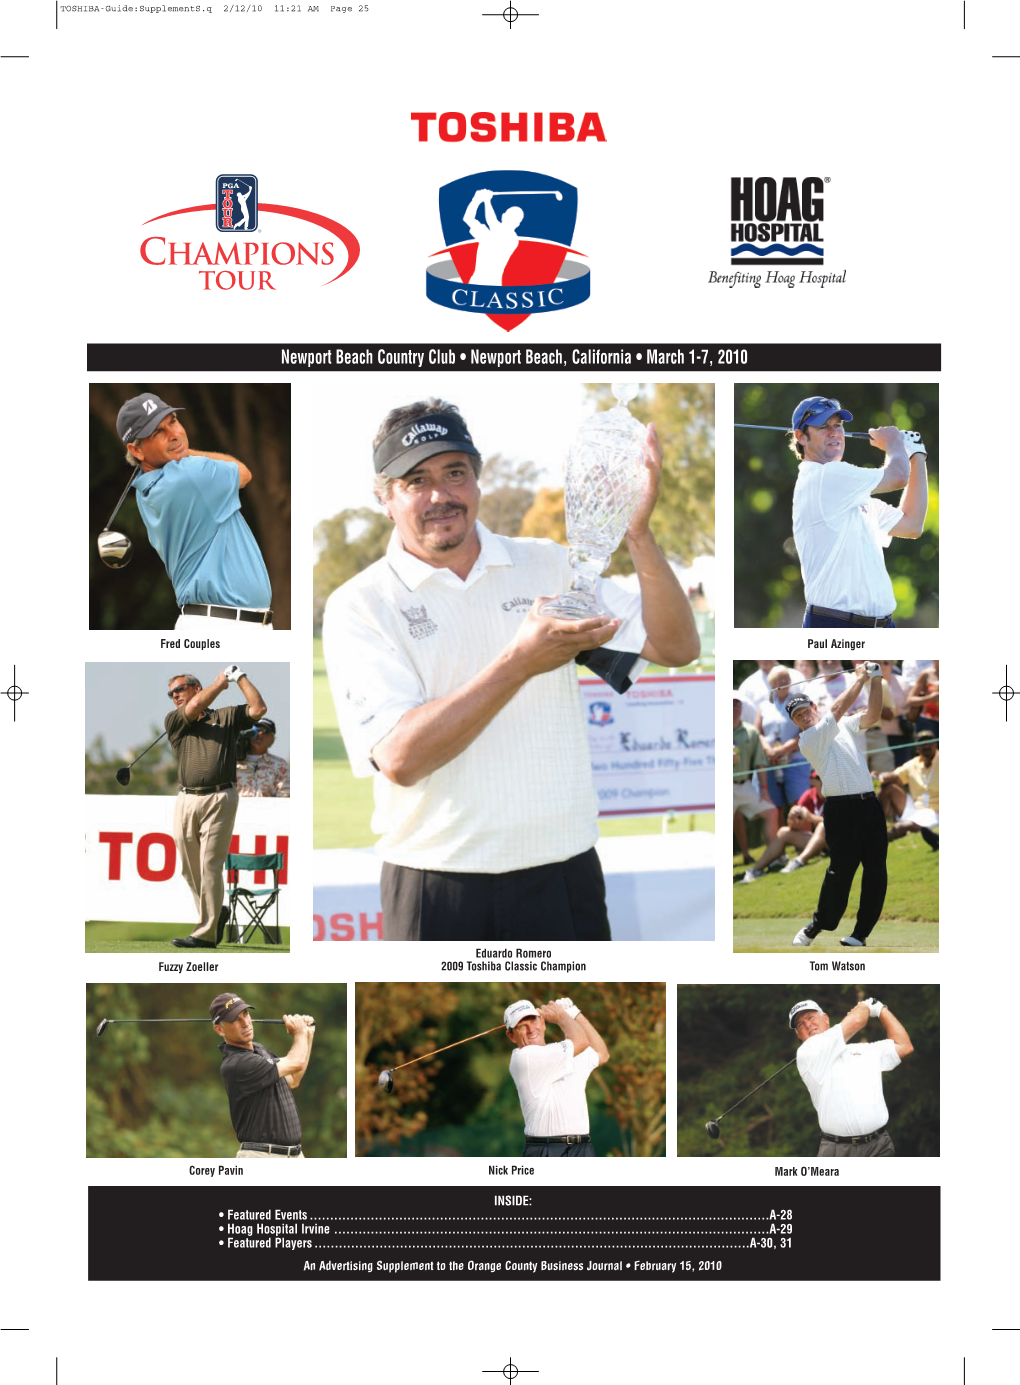 Ropy of Toshiba and Other Sponsors, the Toshiba Classic Has Become the Charity Leader on the PGA Champions Tour